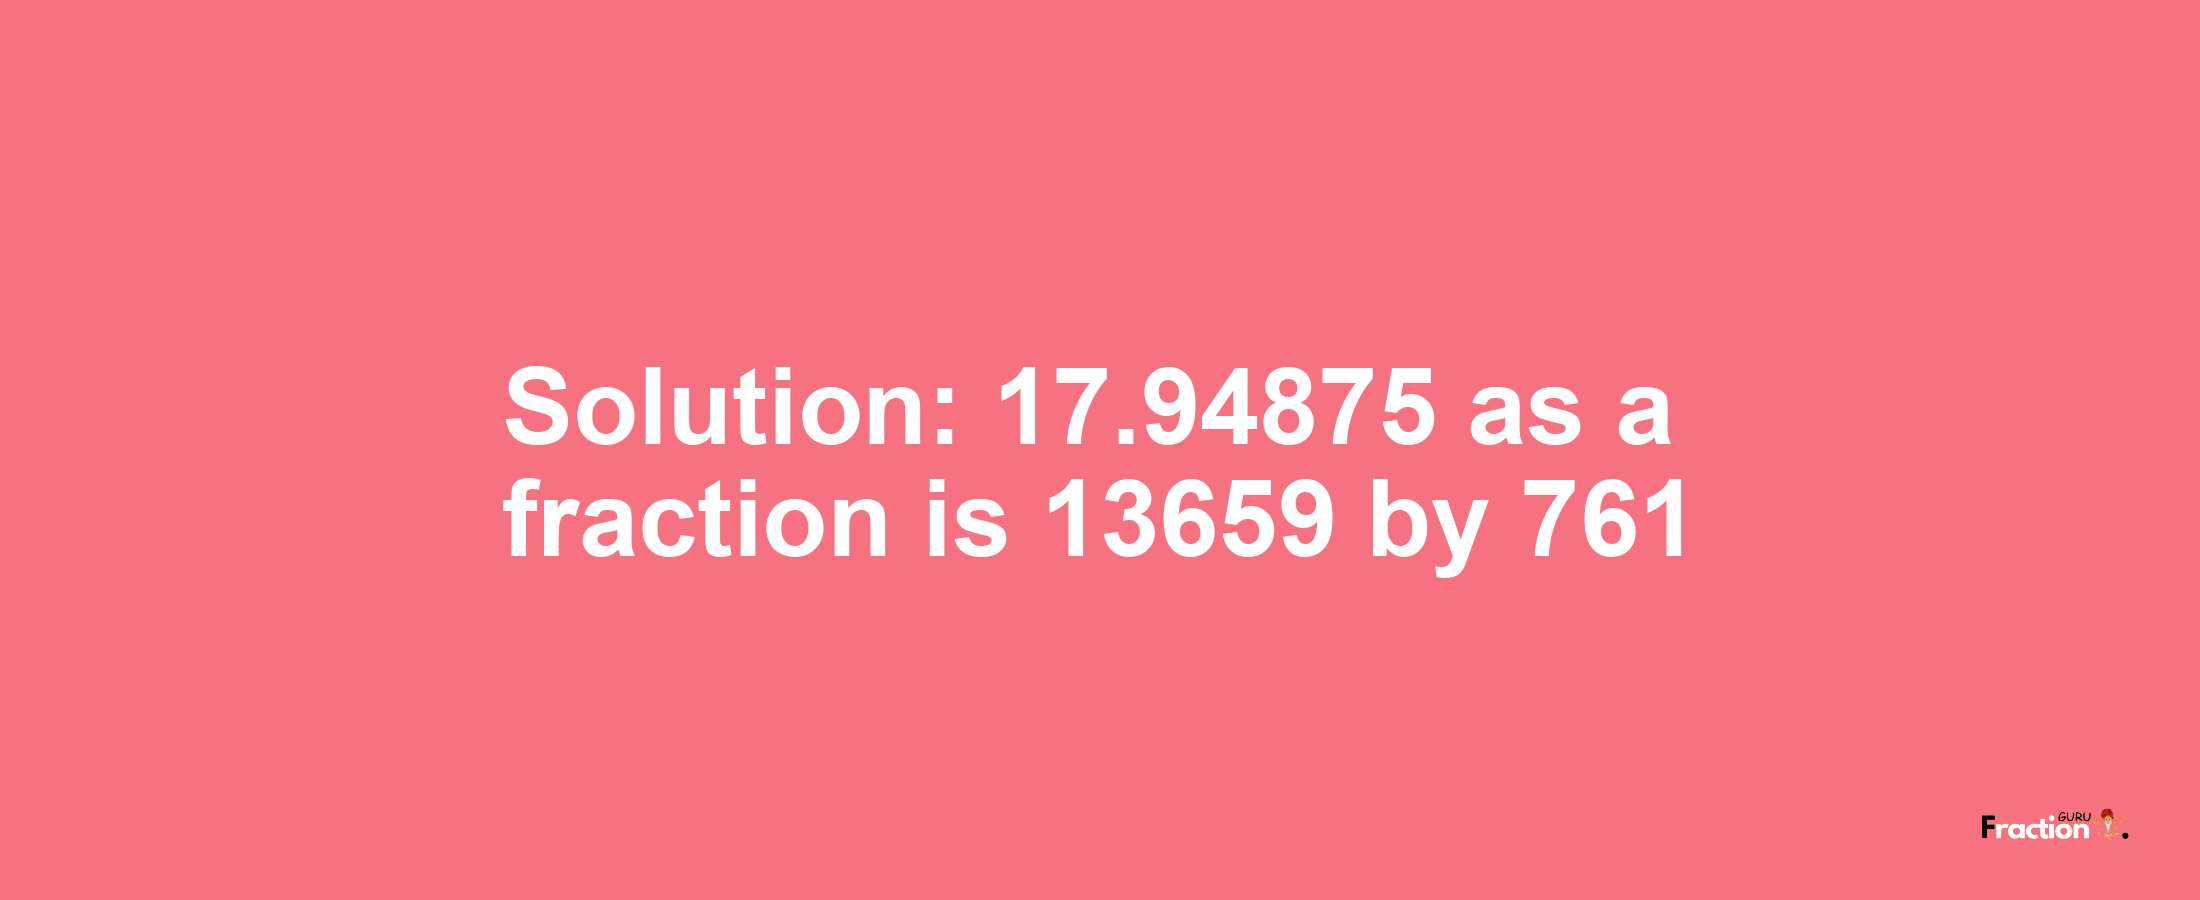 Solution:17.94875 as a fraction is 13659/761